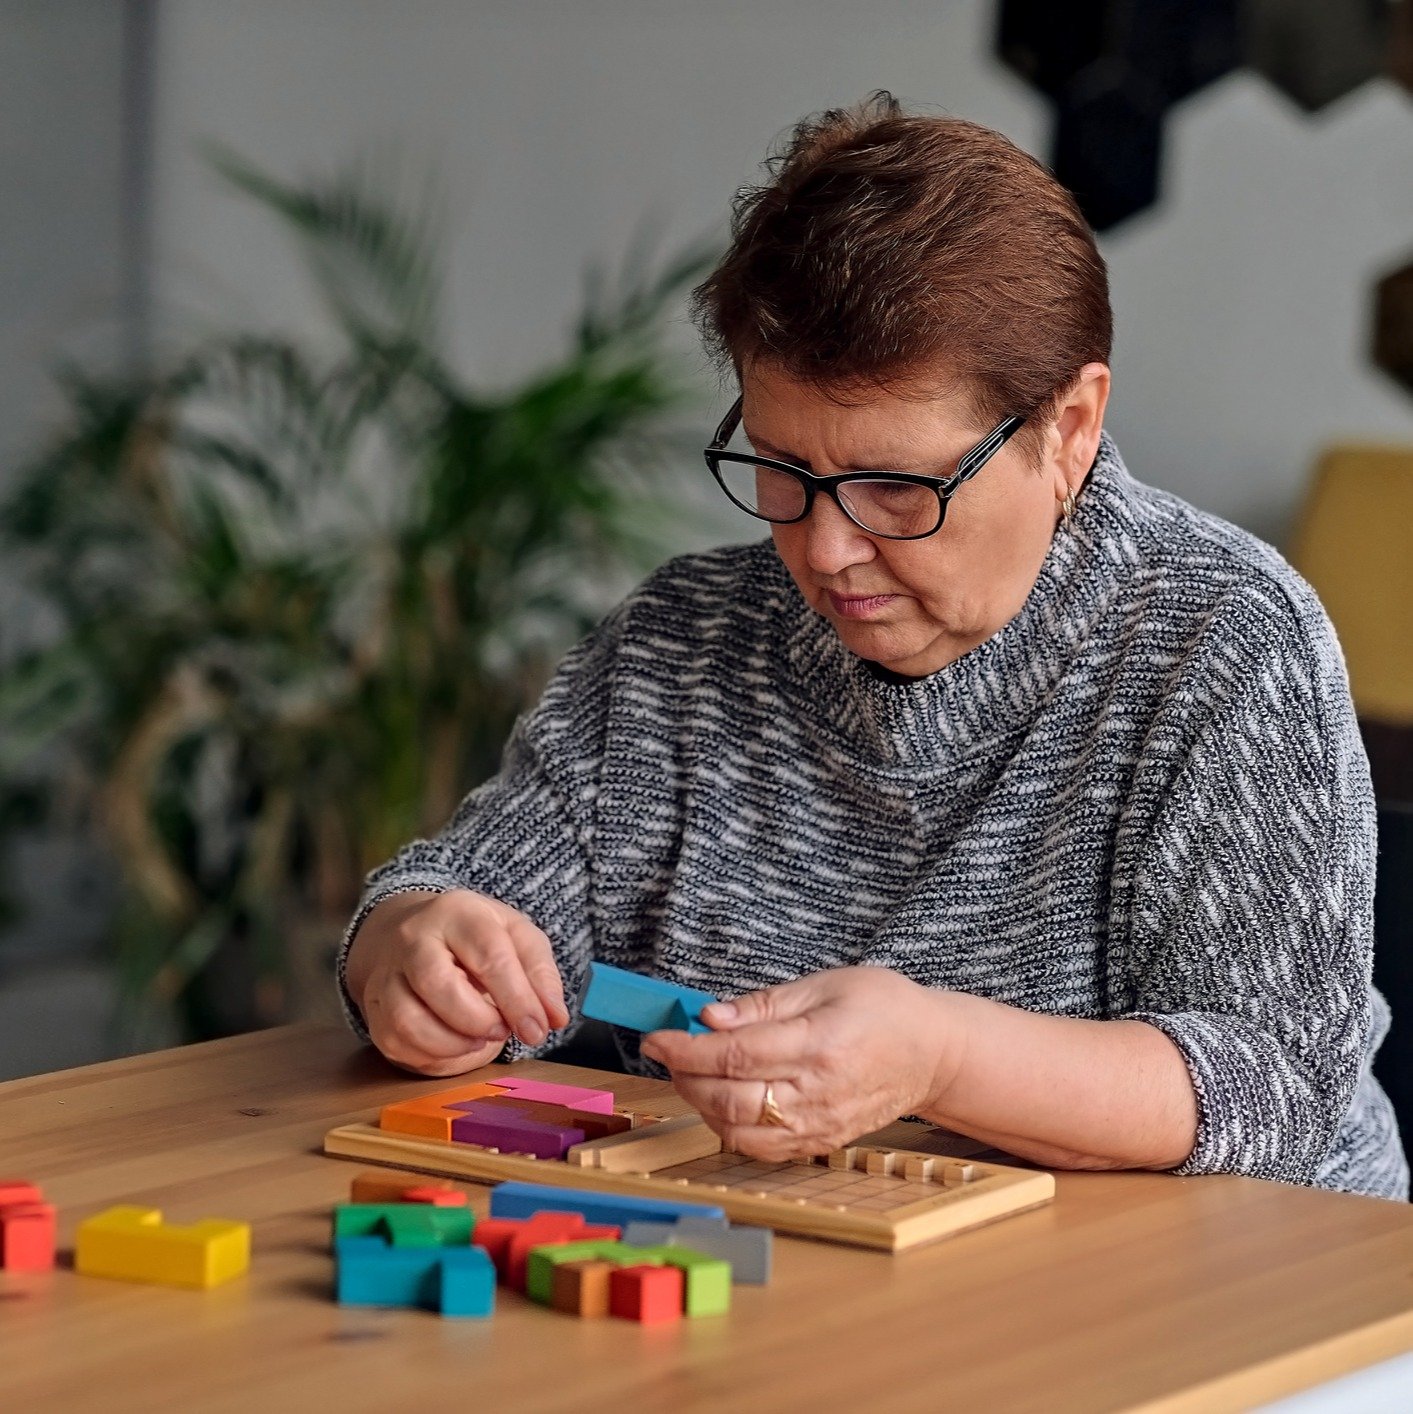 Elderly woman sitting at table and sorting jigsaw puzzle pieces